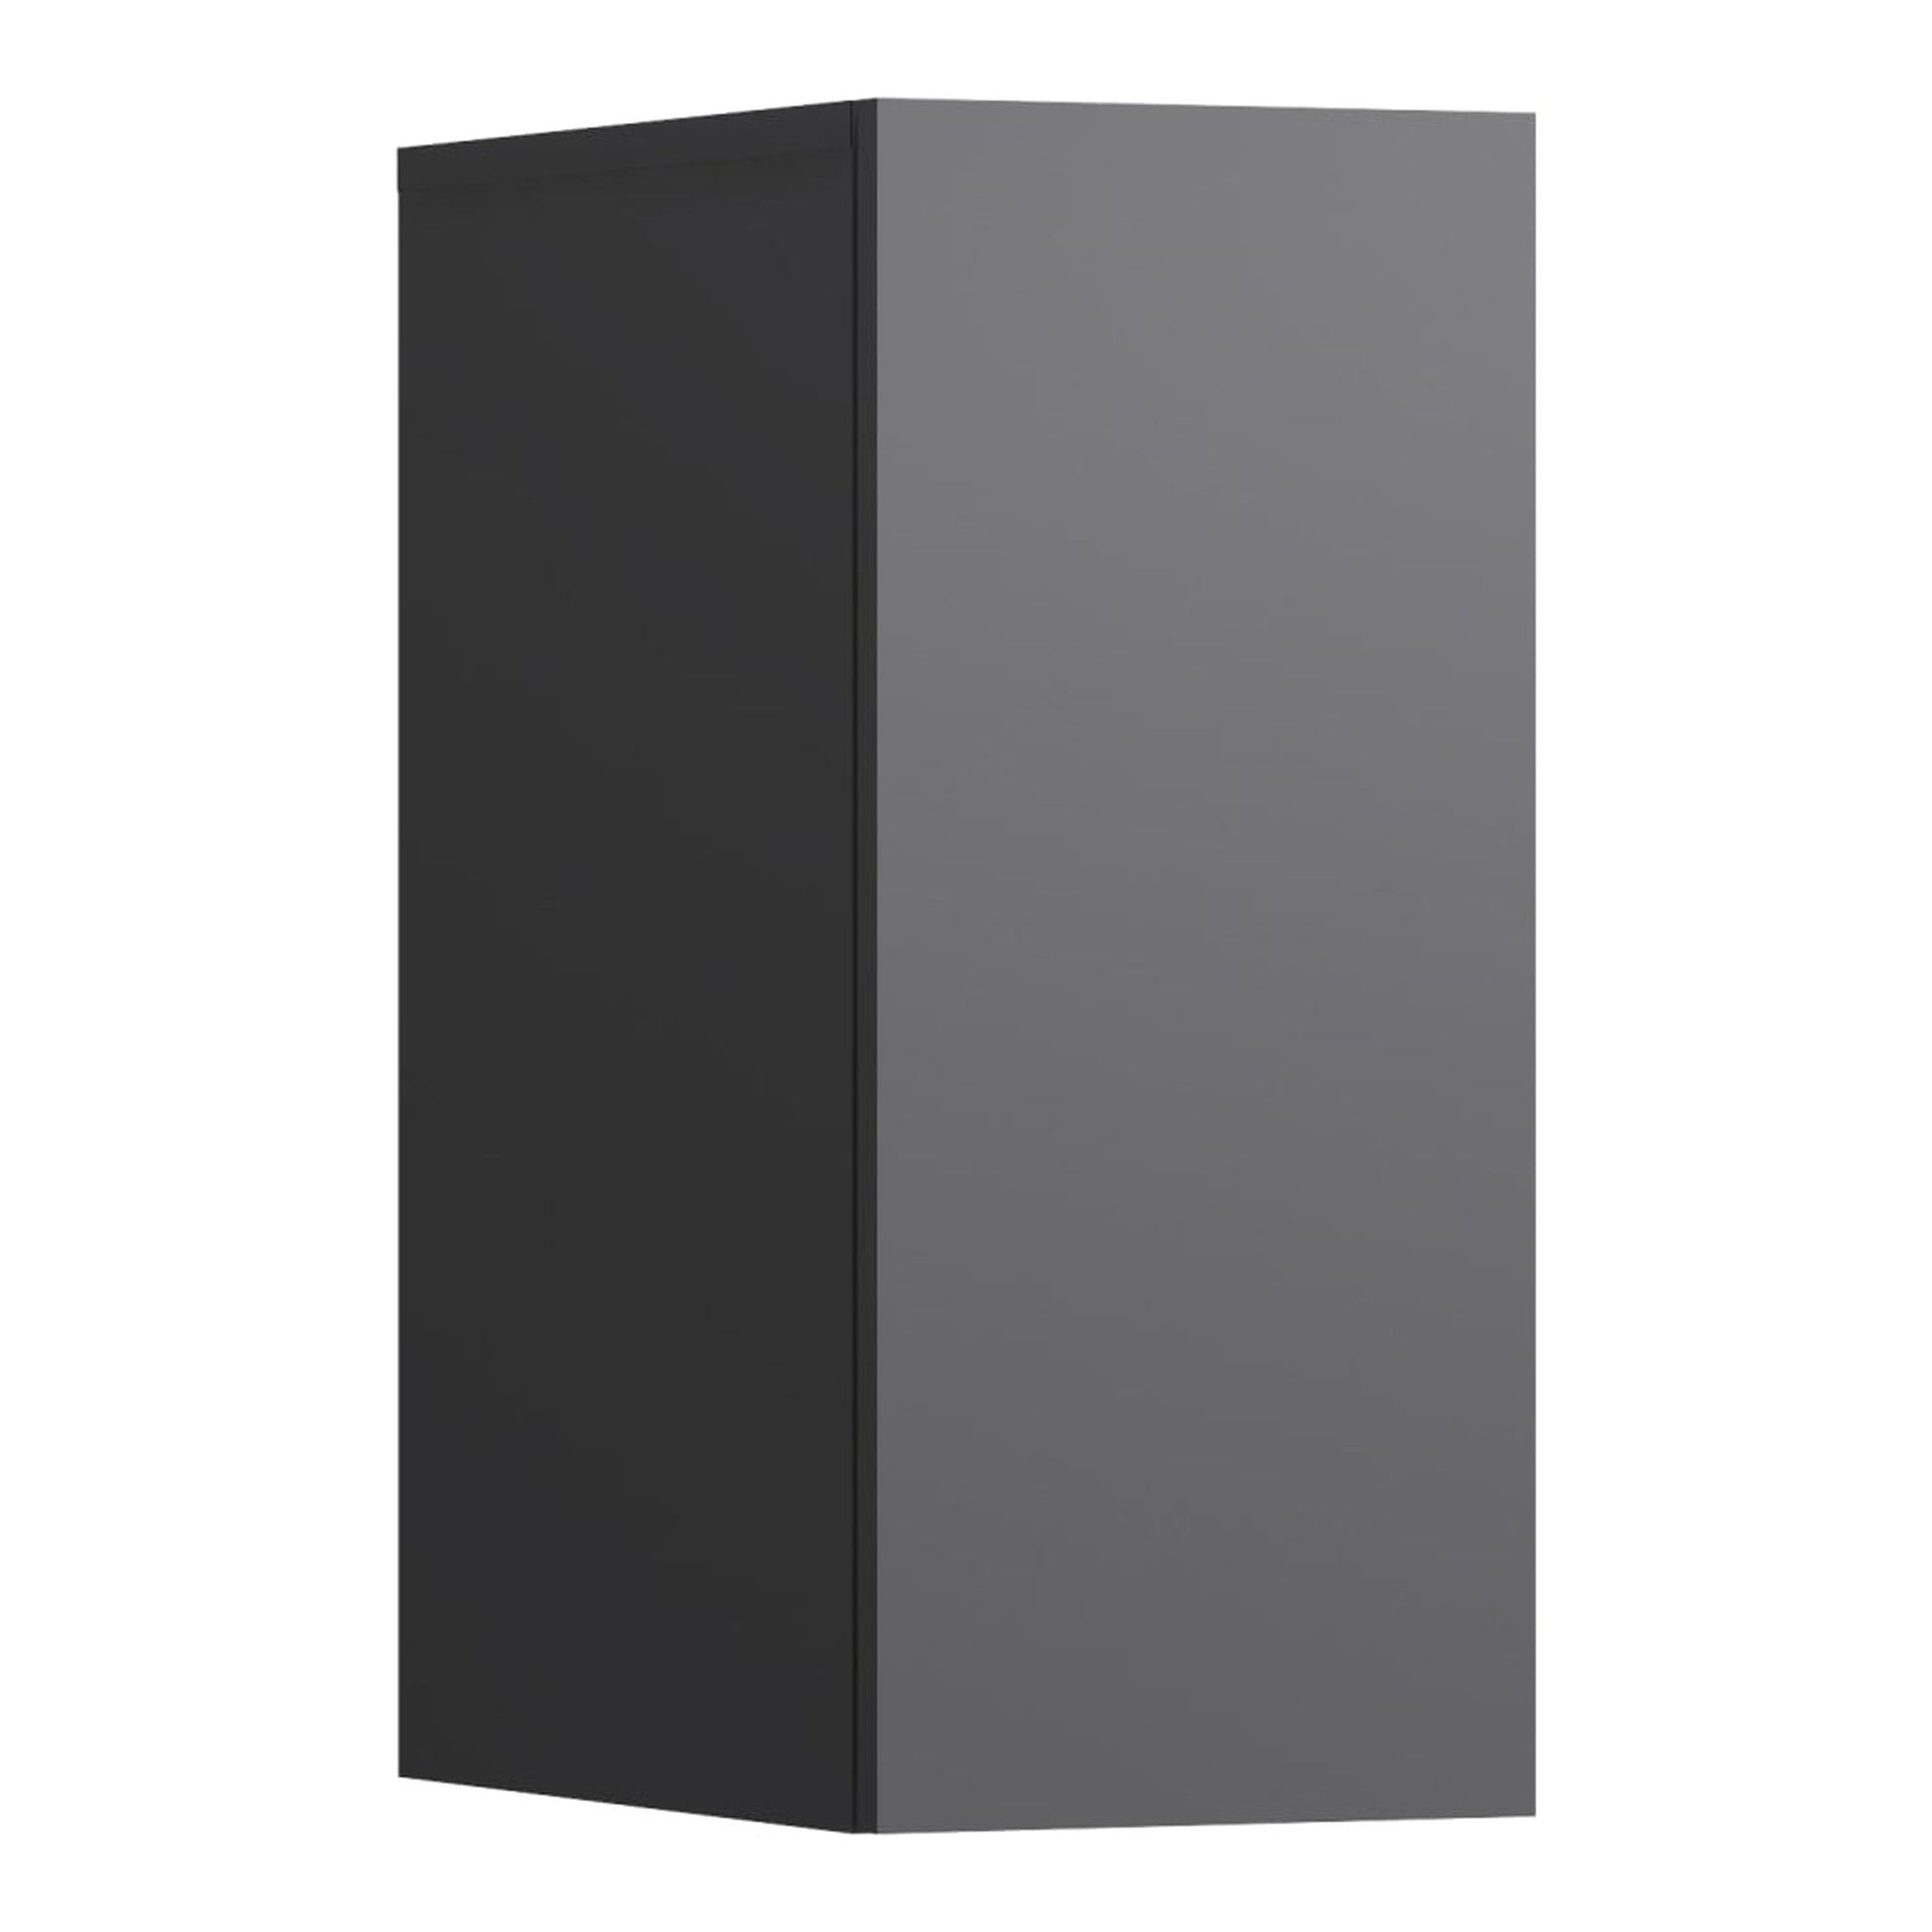 Laufen Kartell 12" x 28" 1-Door Right-Hinged Slate Gray Cabinet With 1 Fixed Wooden Shelf